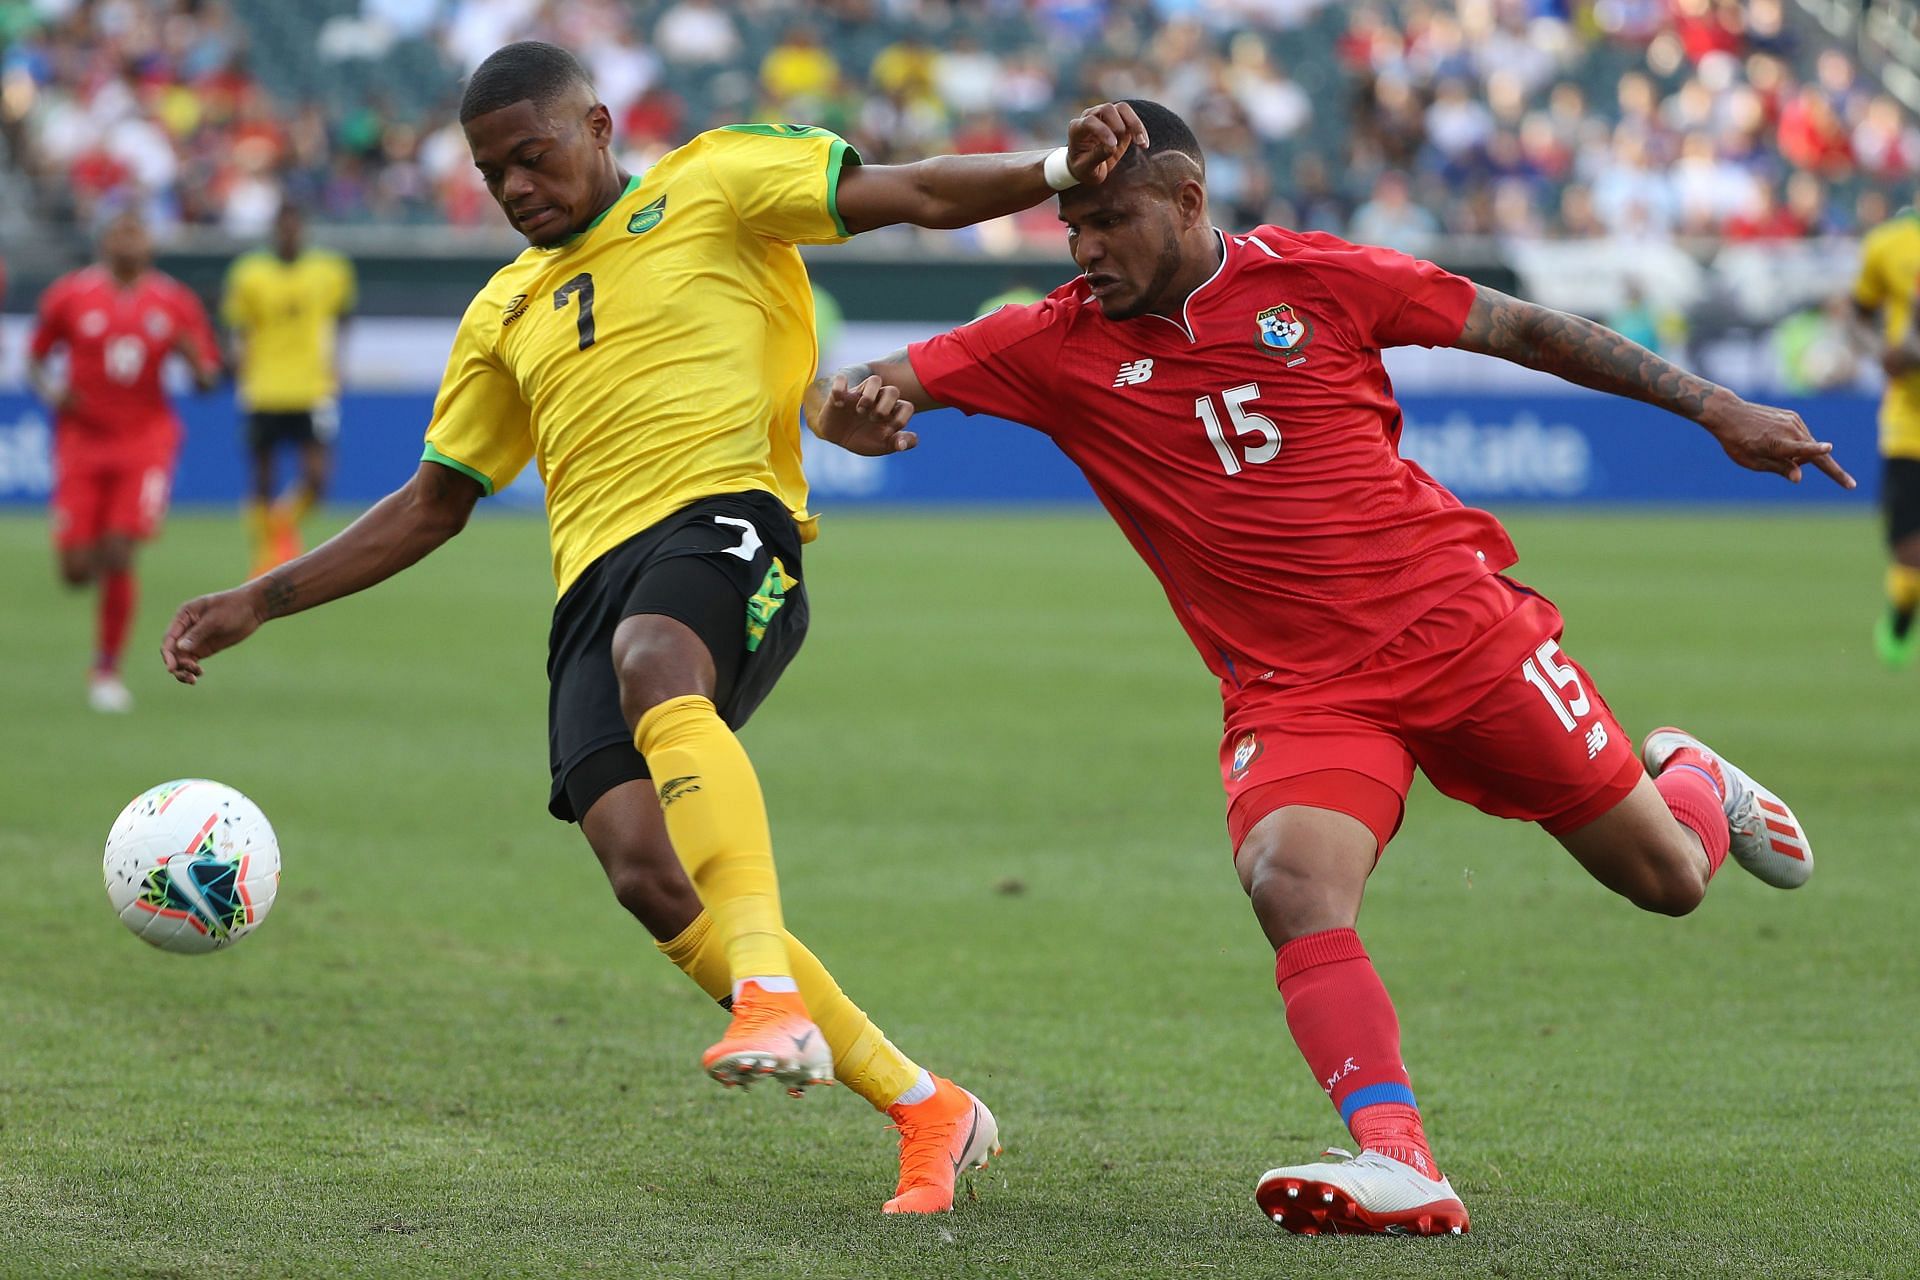 Panama host Jamaica in their upcoming 2022 FIFA World Cup qualifying campaign on Sunday